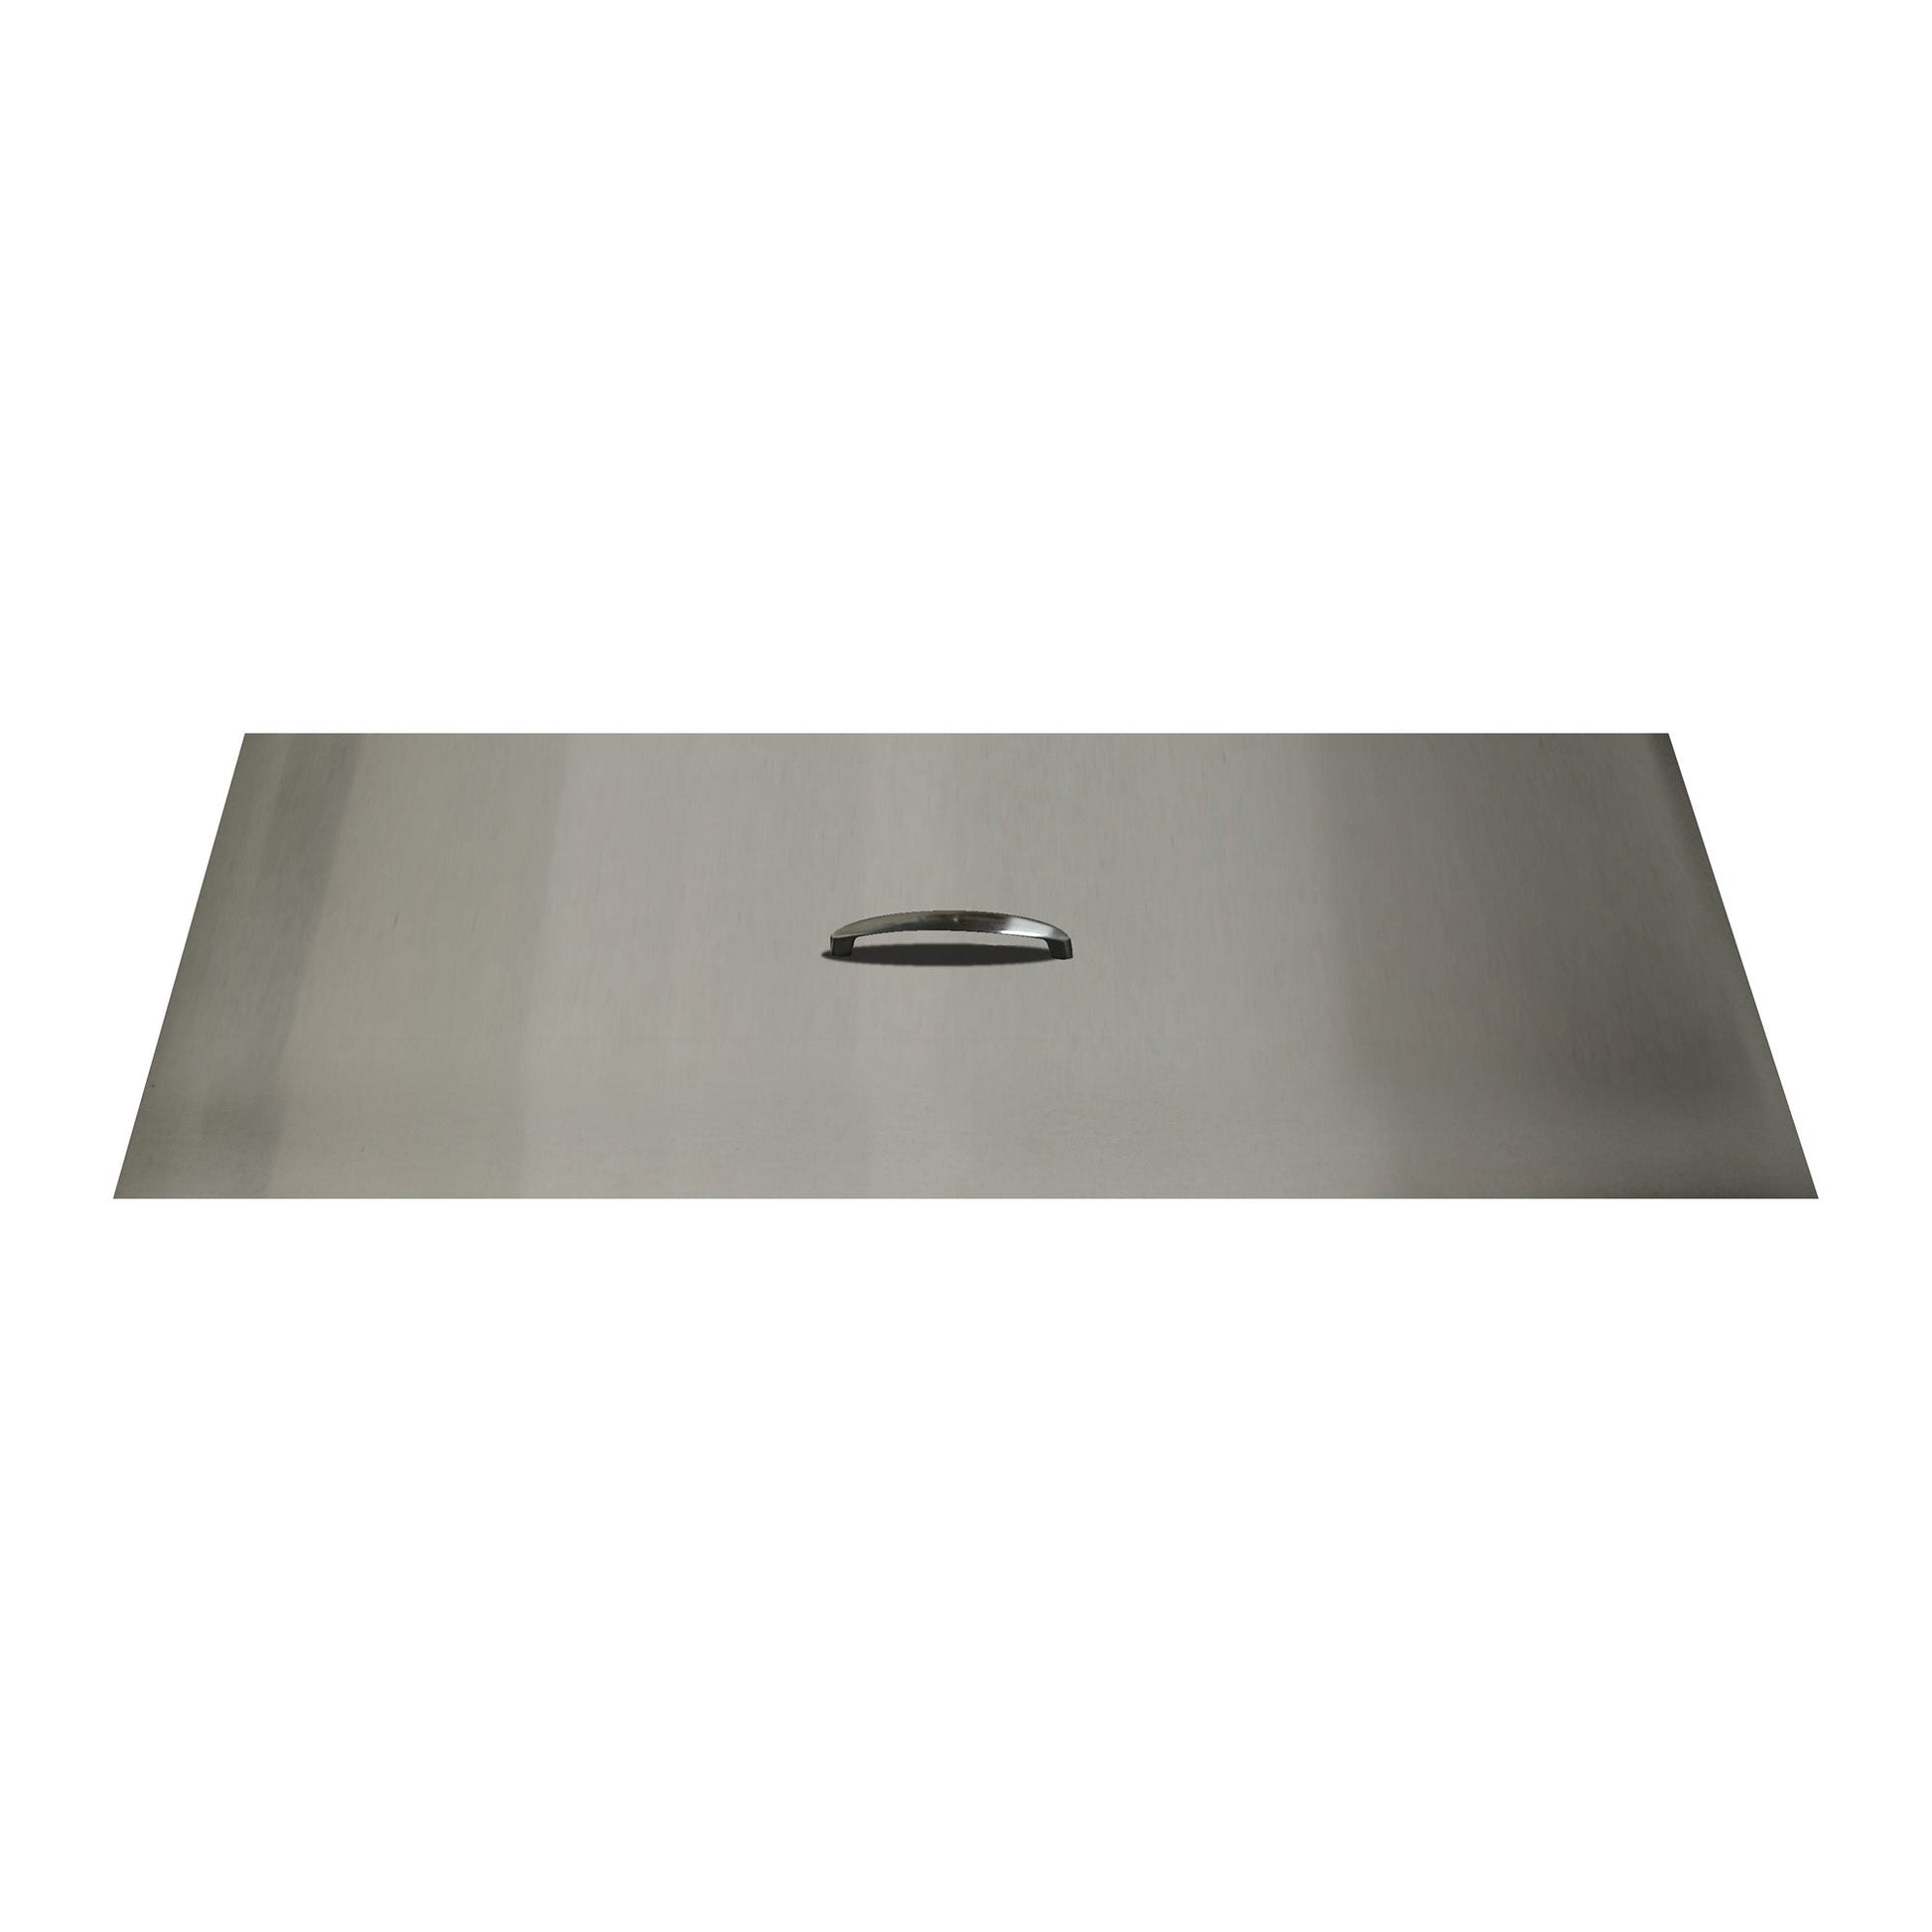 The Outdoor Plus 16" x 64" Stainless Steel Rectangular Fire Pit Lid Cover